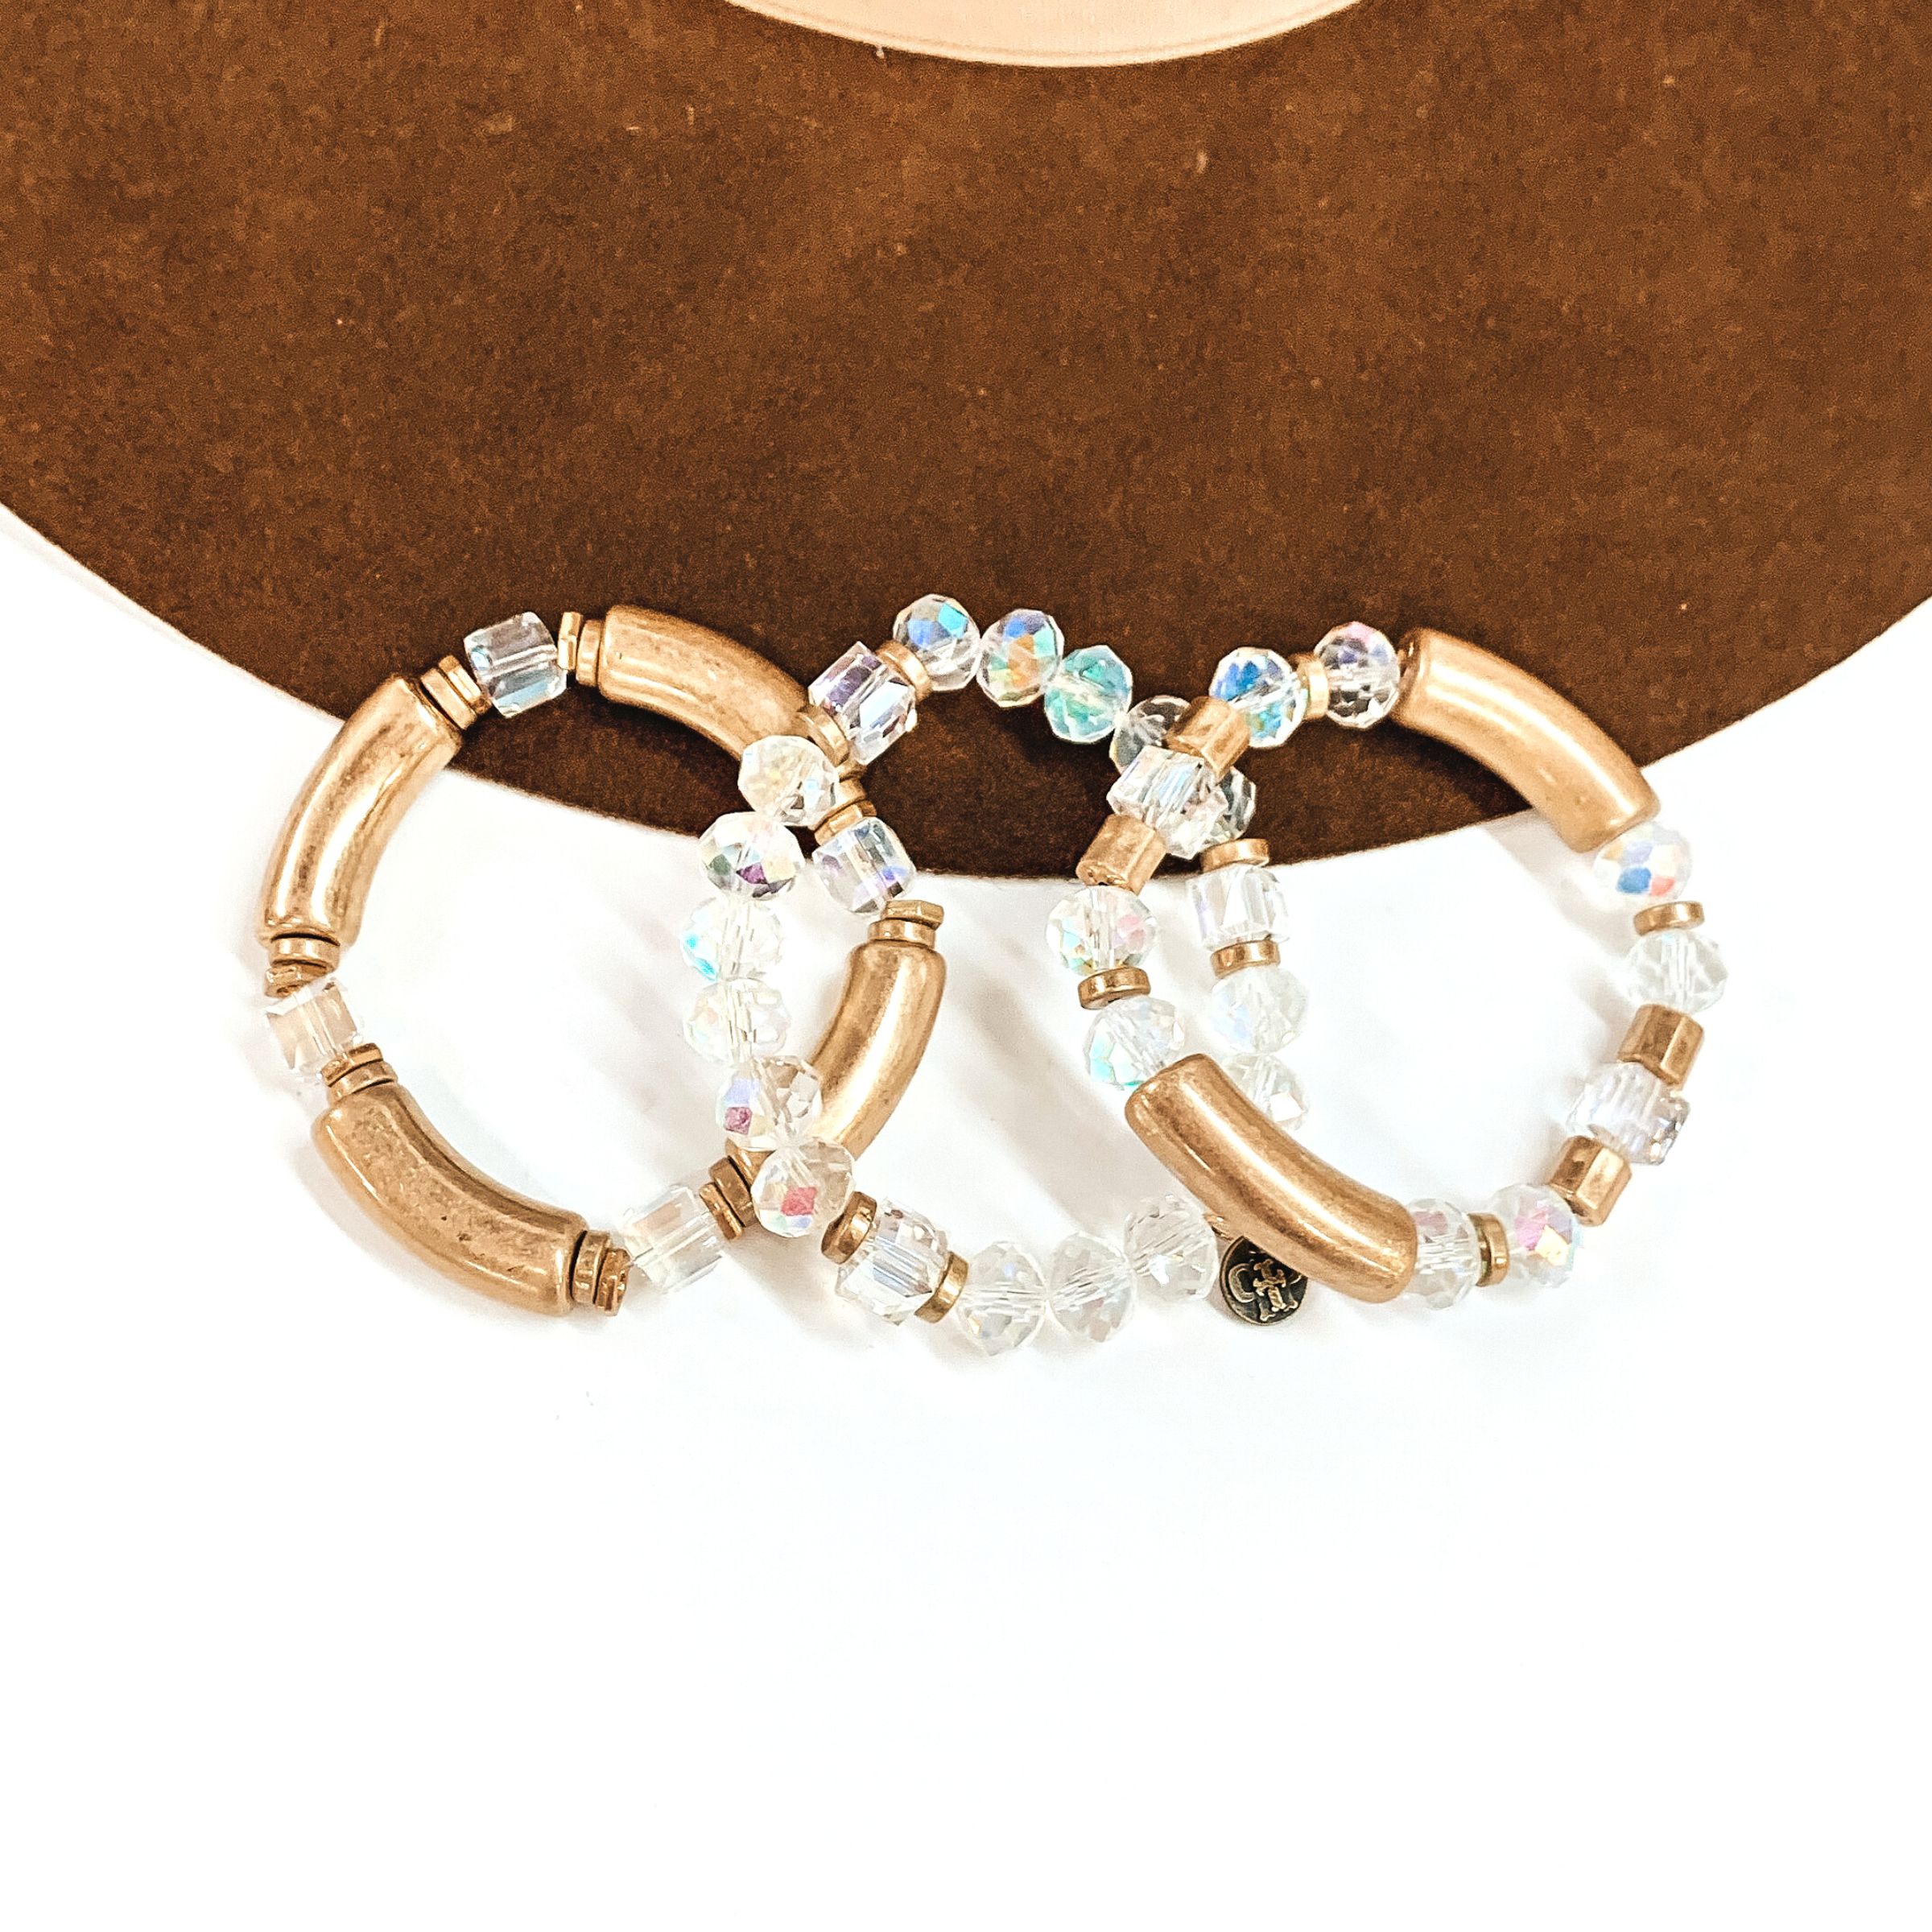 This is a set of three bangle bracelets in gold and ab clear crystals in different  shapes. From left to right; gold tubes with square ab clear crystals, the middle  bracelet has a mix of circle and square ab clear crystals. The right bracelet  has two gold tubes, circle ab clear crystals, and gold square beads. These  bracelets are taken laying on a dark brown felt hat and on a white background.